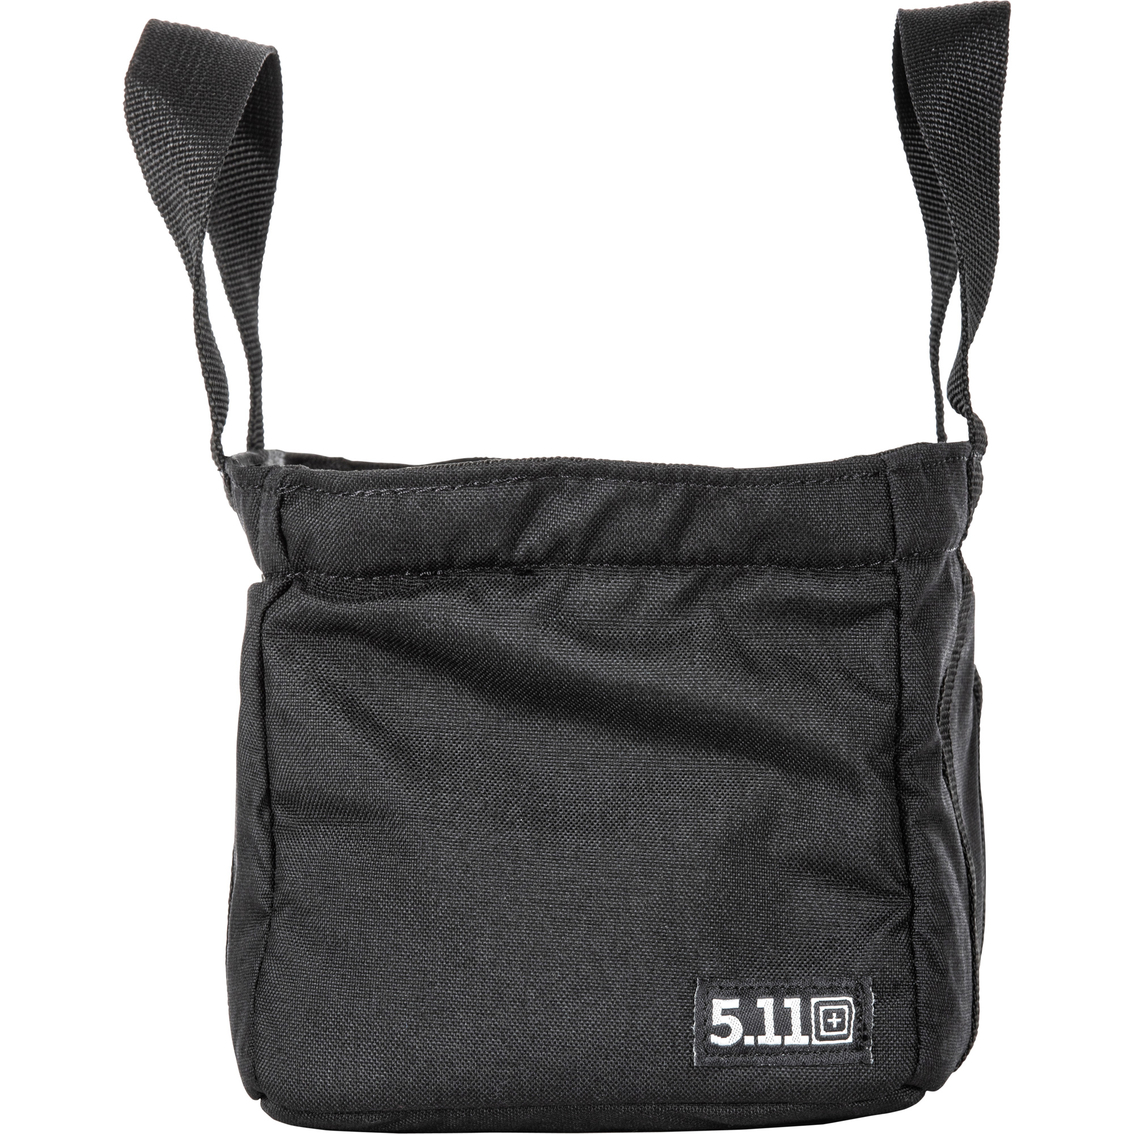 5.11 Range Master Padded Pouch - Image 5 of 6